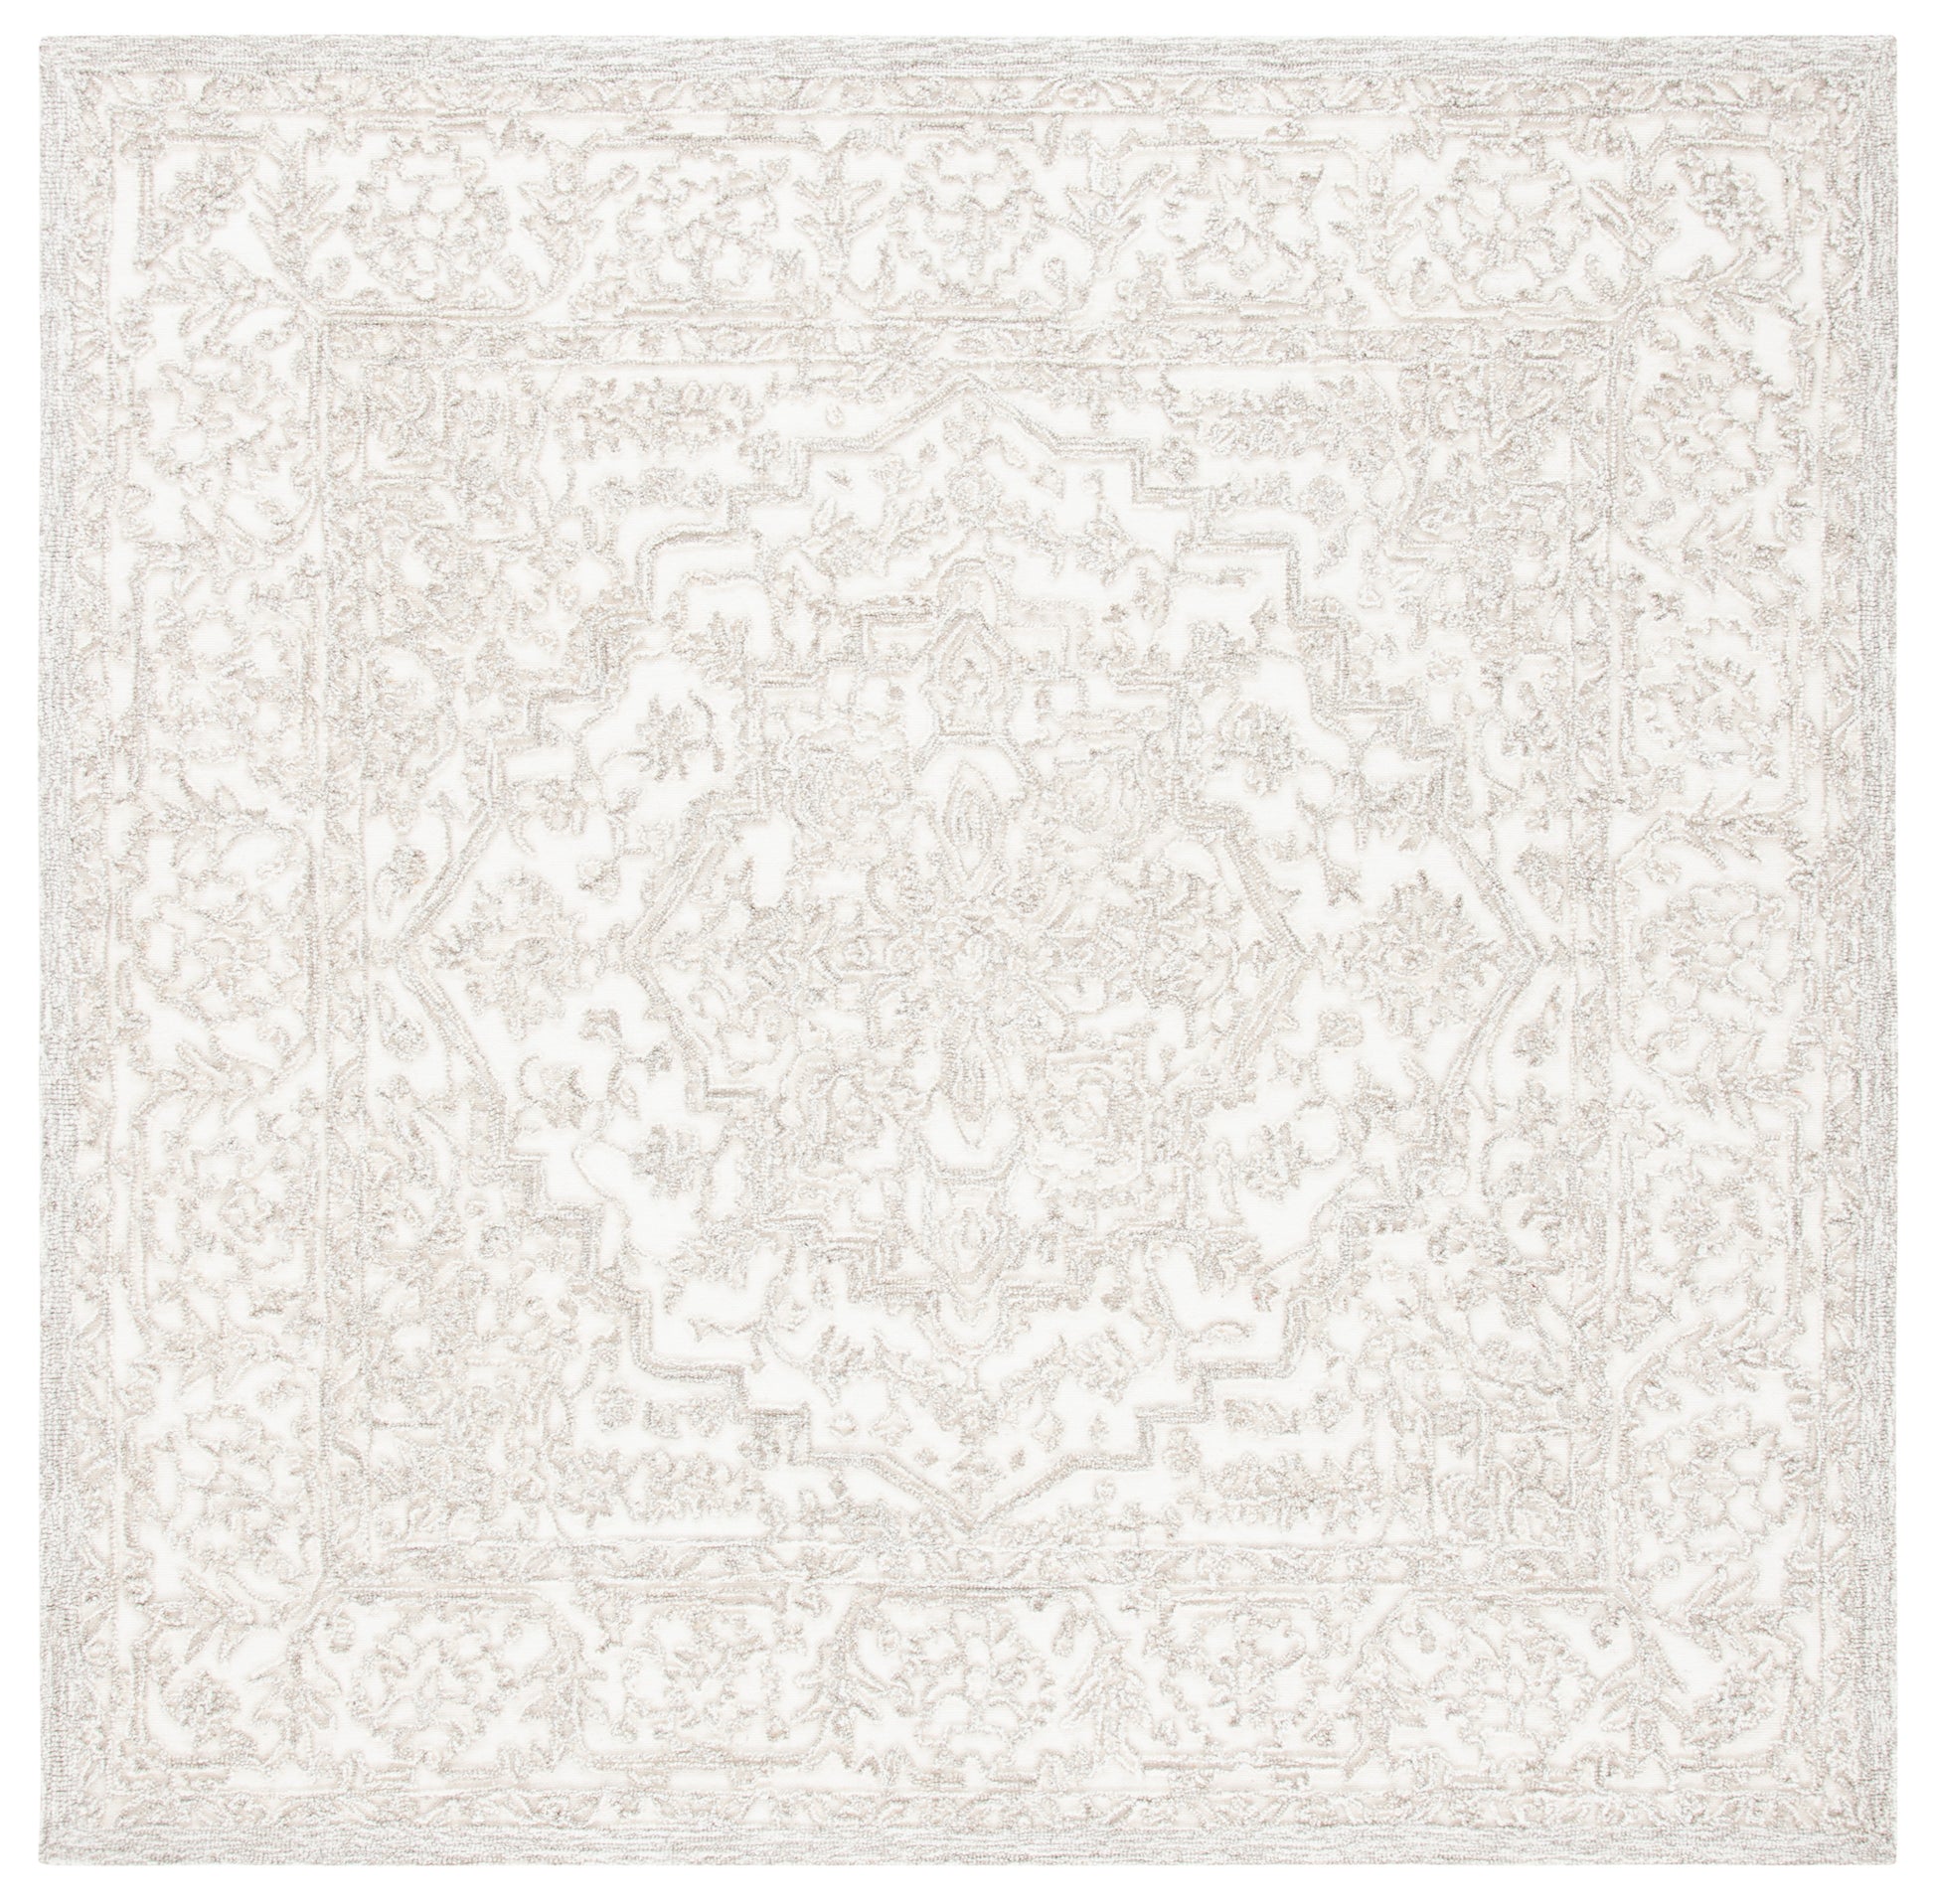 Safavieh Trace Trc302A Ivory/Natural Area Rug